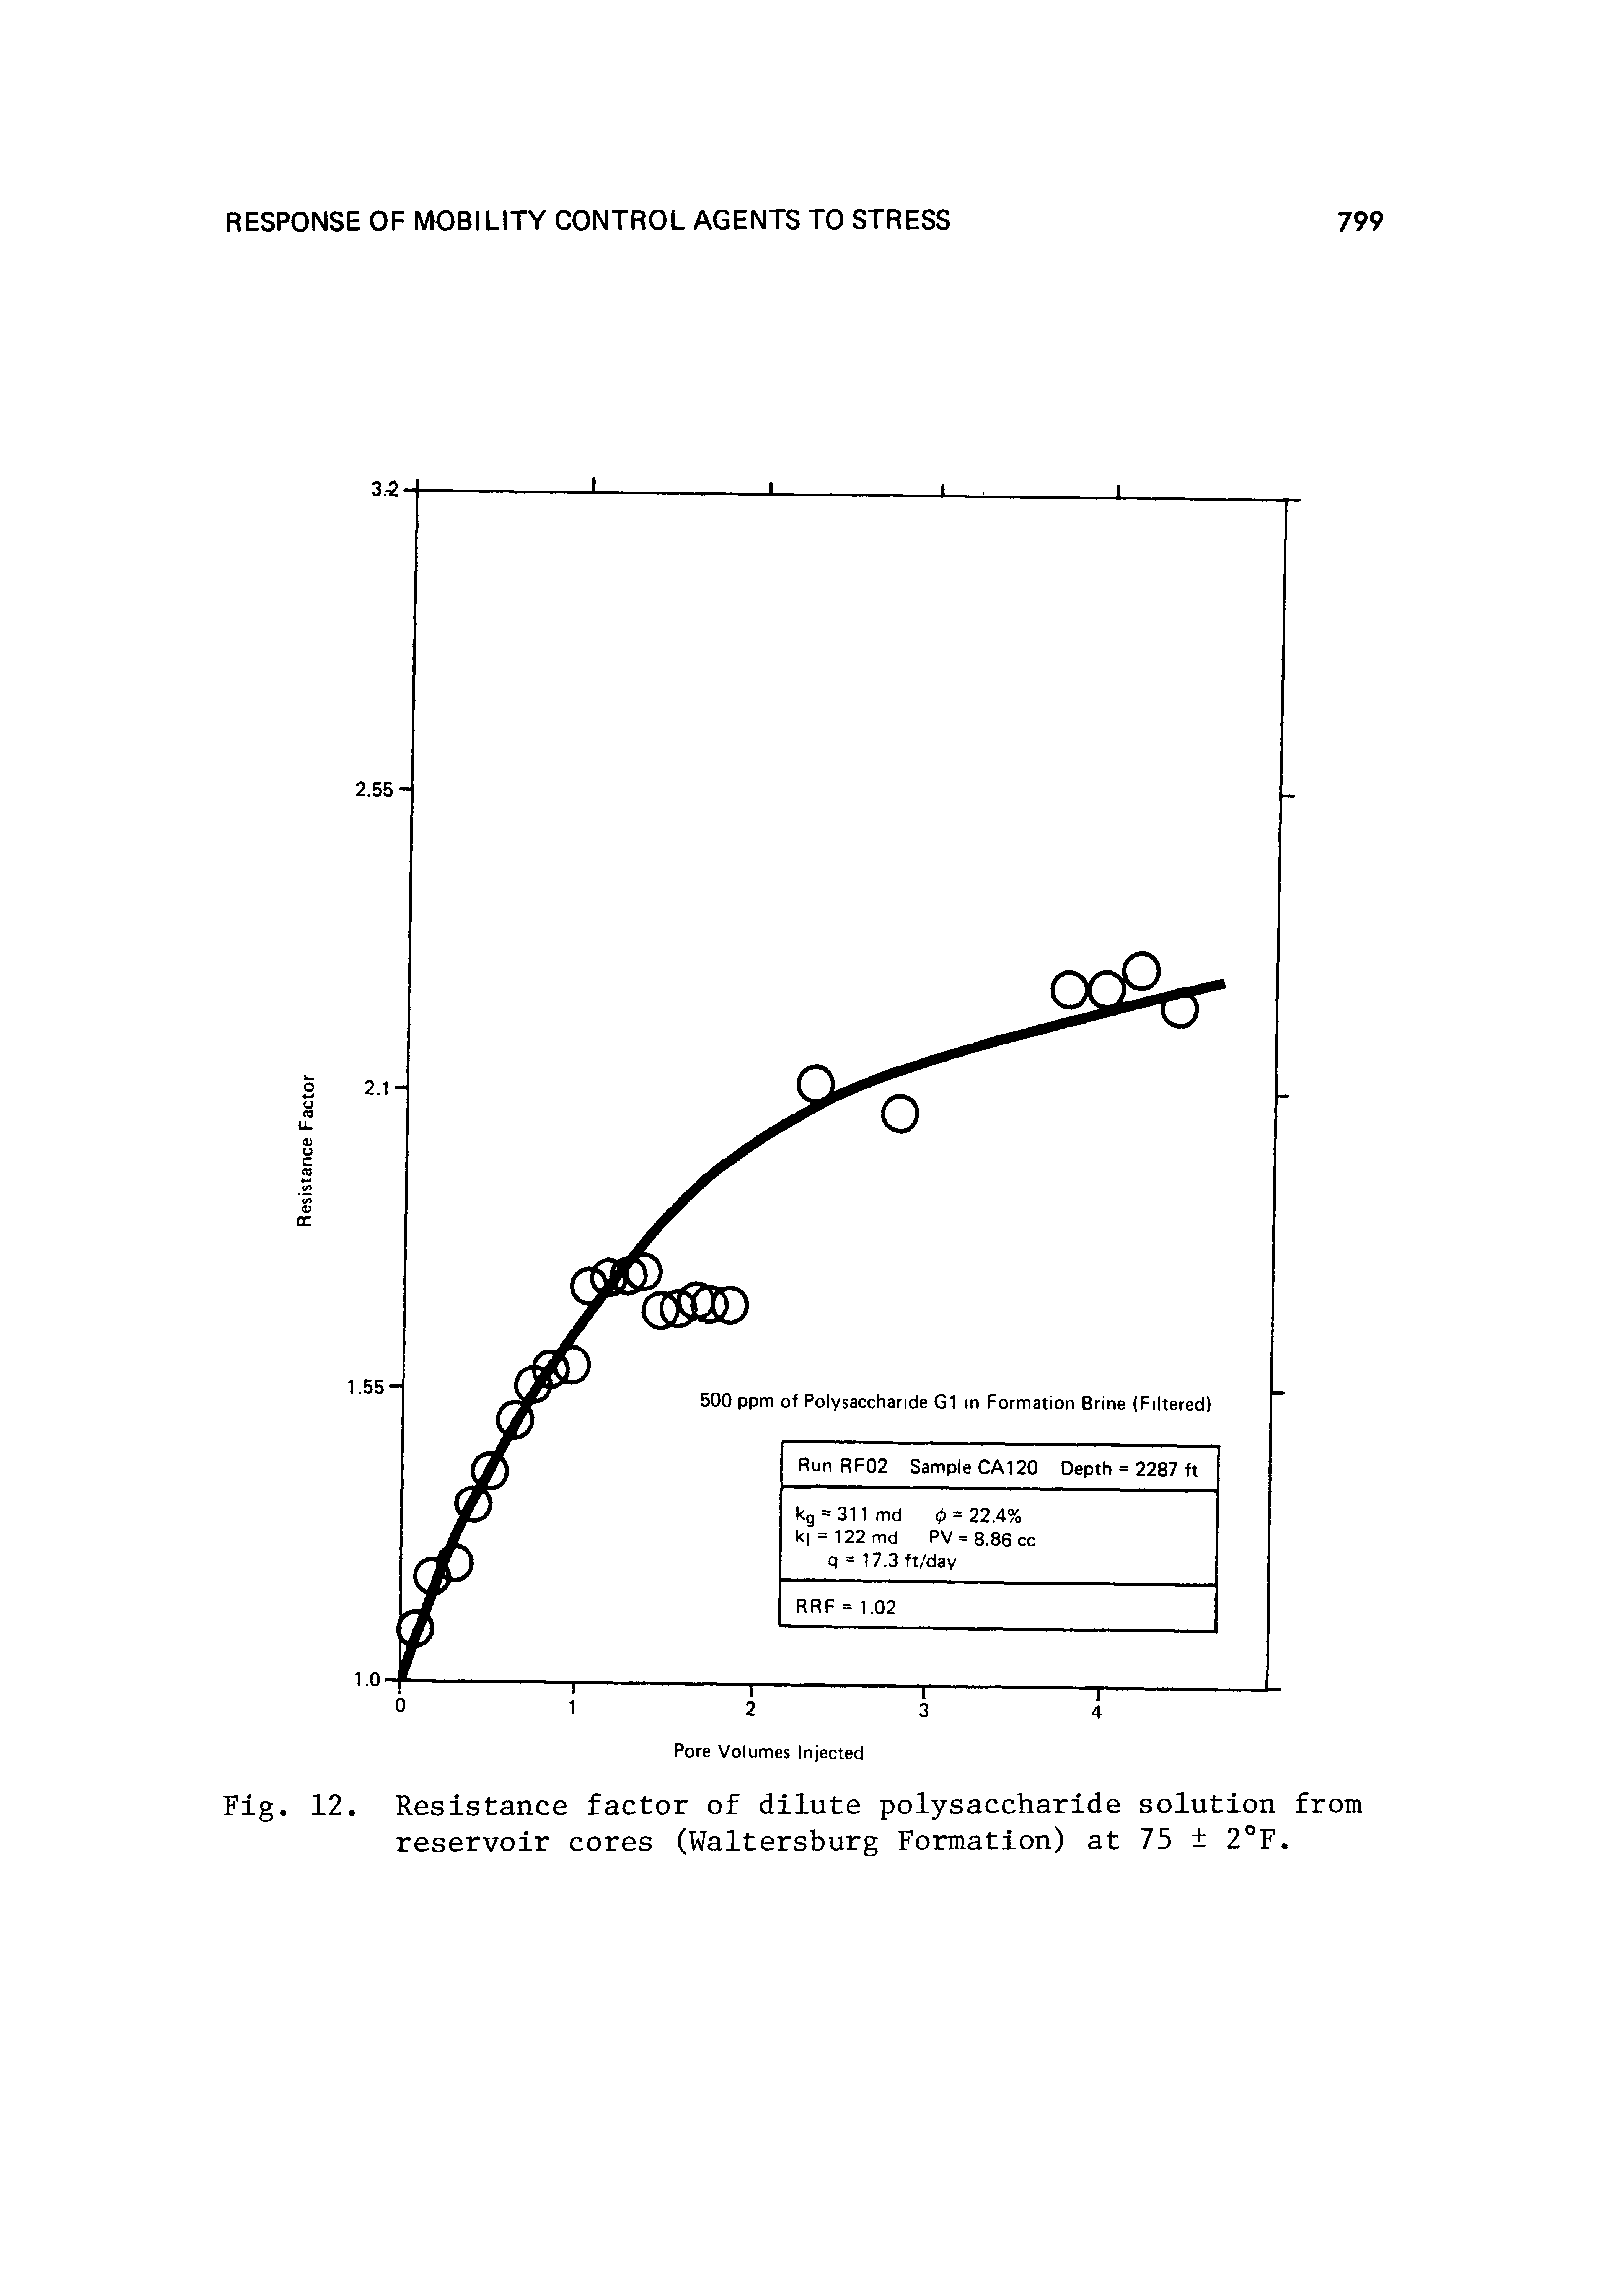 Fig. 12. Resistance factor of dilute polysaccharide solution from reservoir cores (Waltersburg Formation) at 75 2°F.